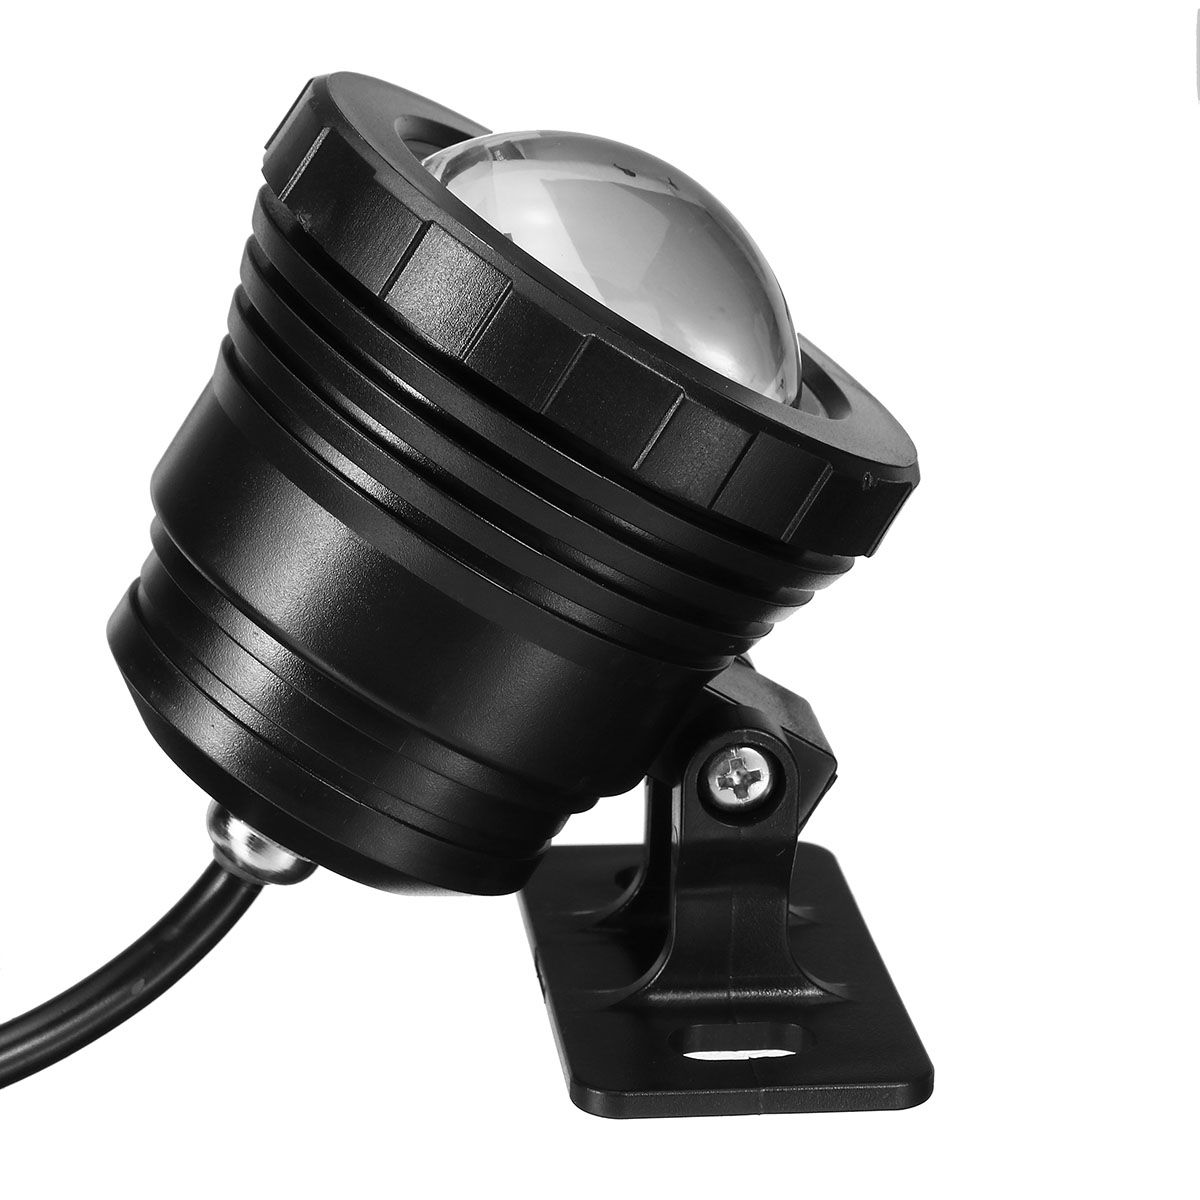 Find 20W AC85 265V RGB LED Spot Lights Underwater Pool Fountain Pond Lamp Waterproof Remote for Sale on Gipsybee.com with cryptocurrencies